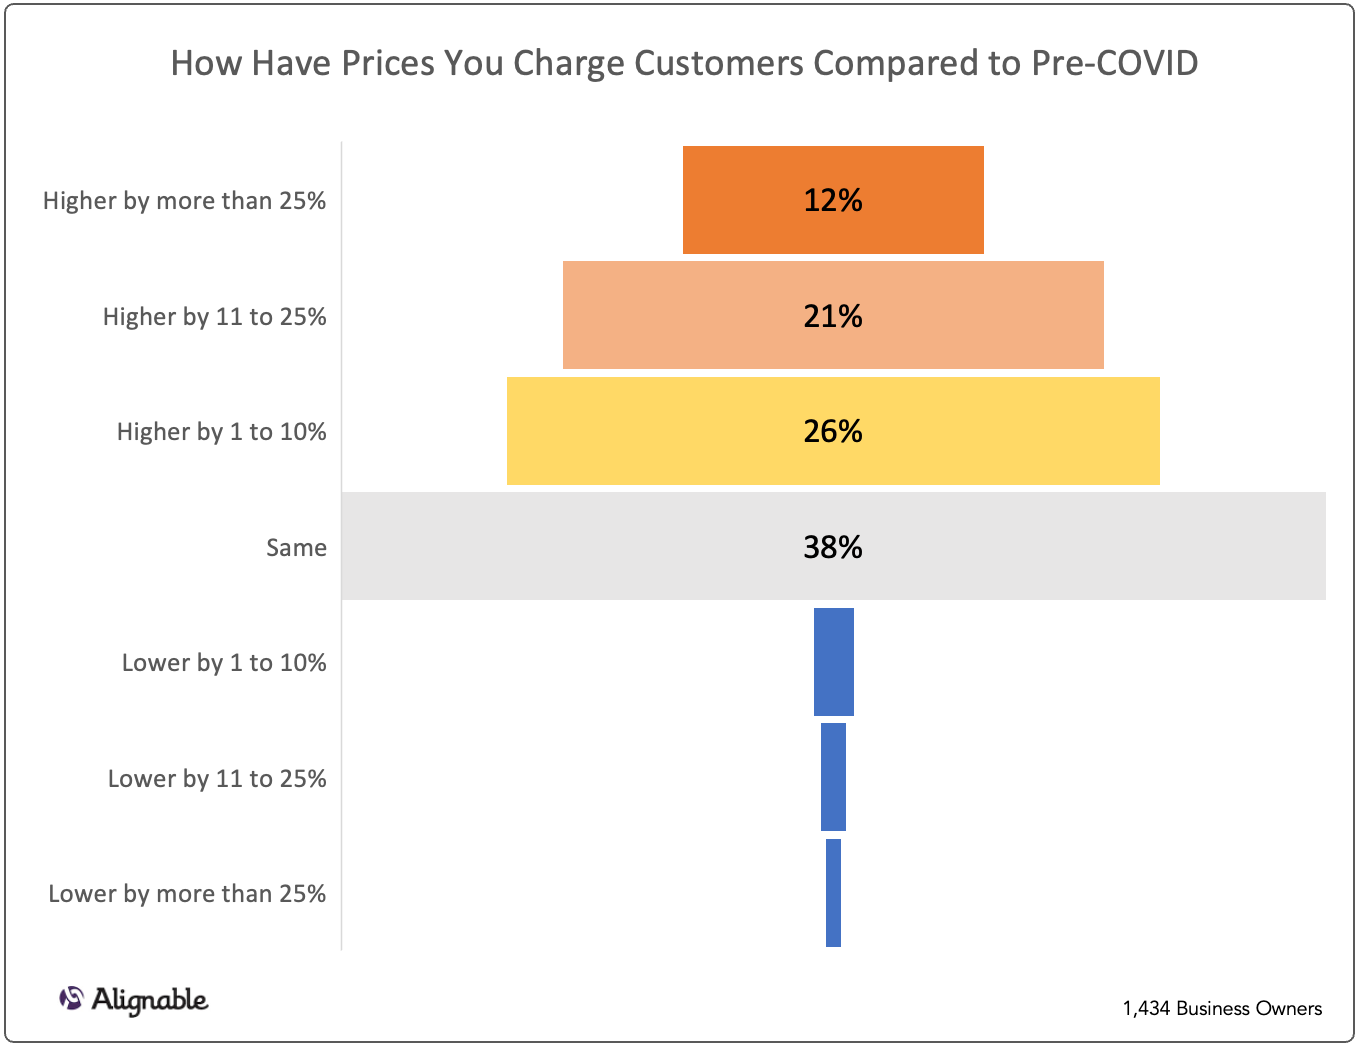 Customer Prices Changed During COVID